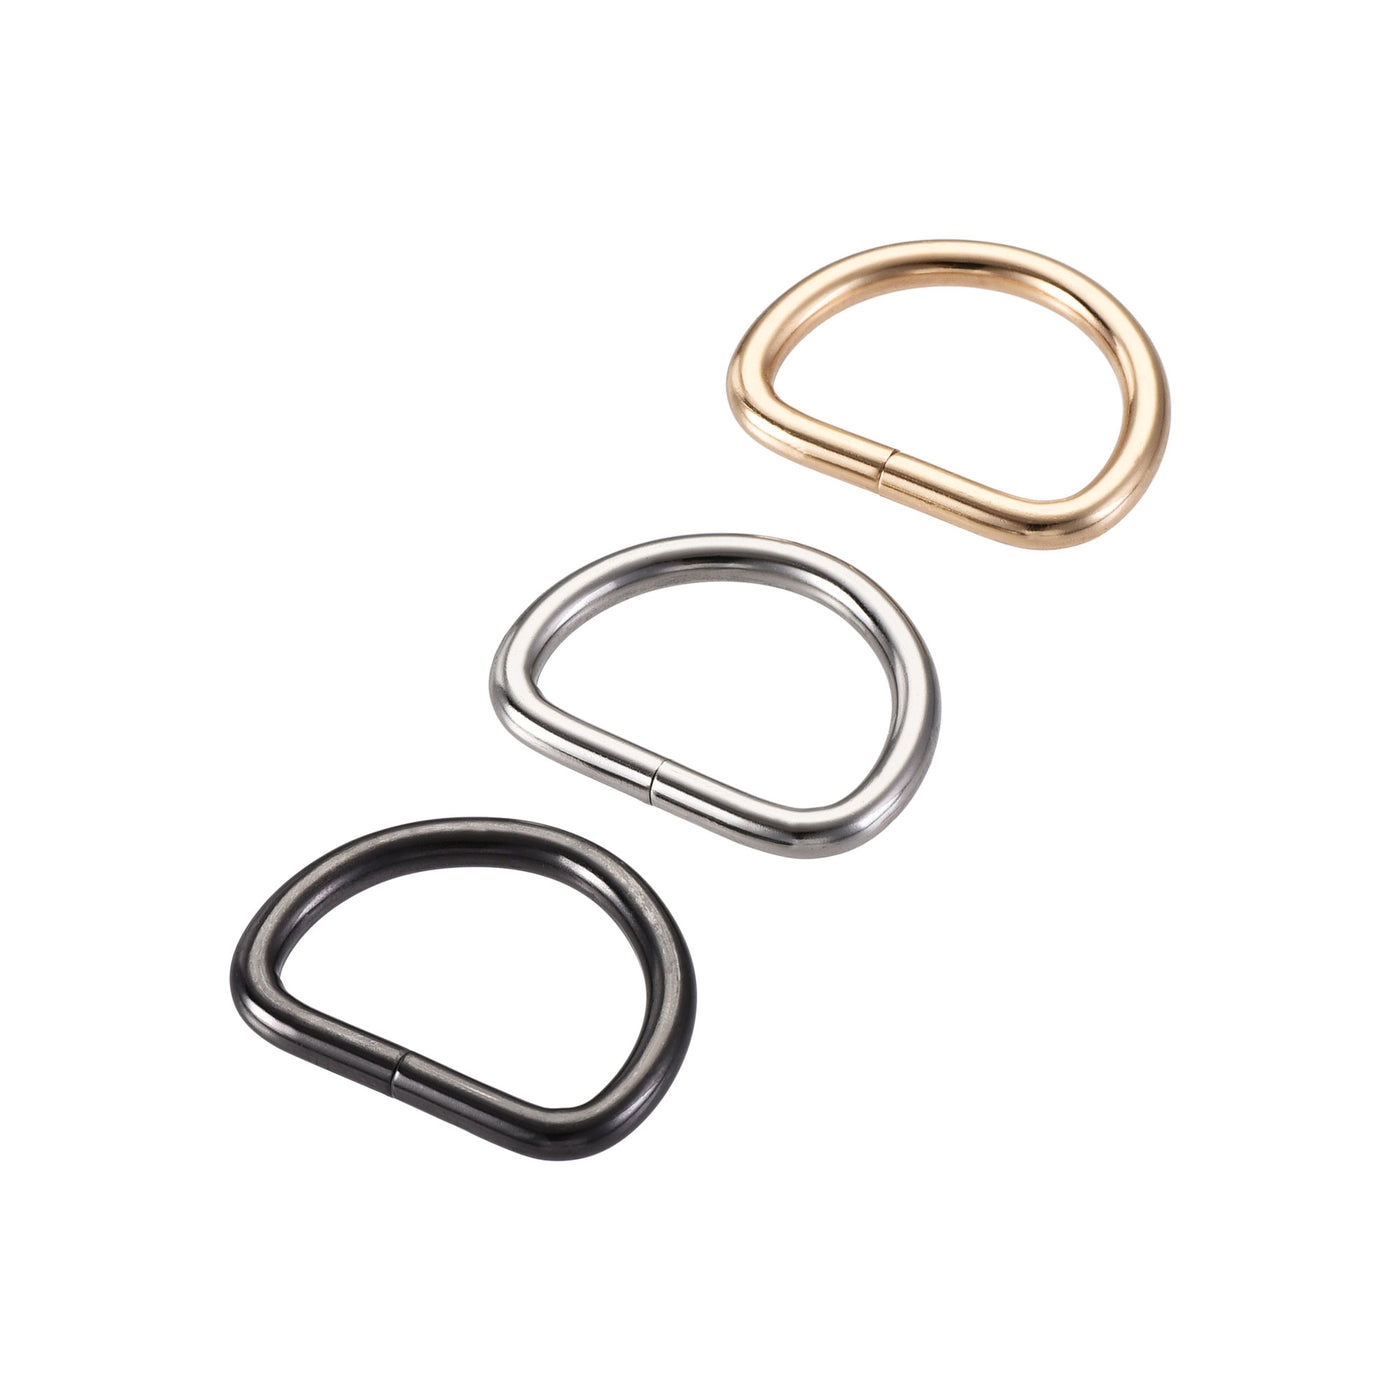 uxcell Uxcell Metal D Ring 0.98"(25mm) D-Rings Buckle Silver Tone, Gold Tone, Black(Total 15pcs)